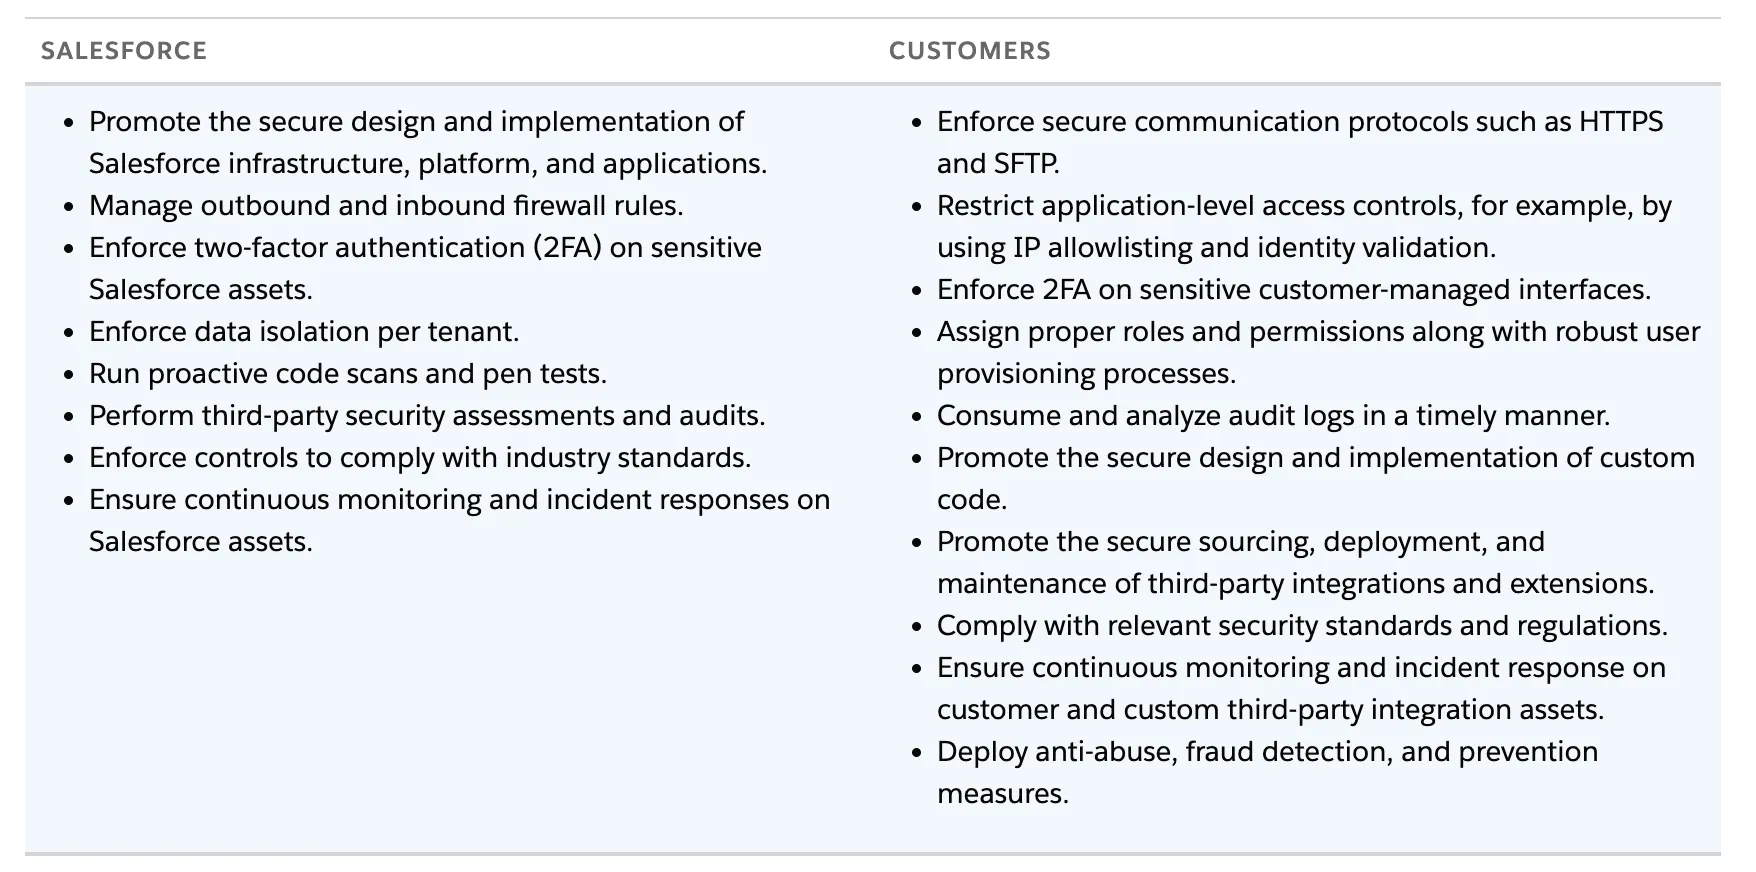 Shared Responsibility model: Data Loss Prevention in Salesforce